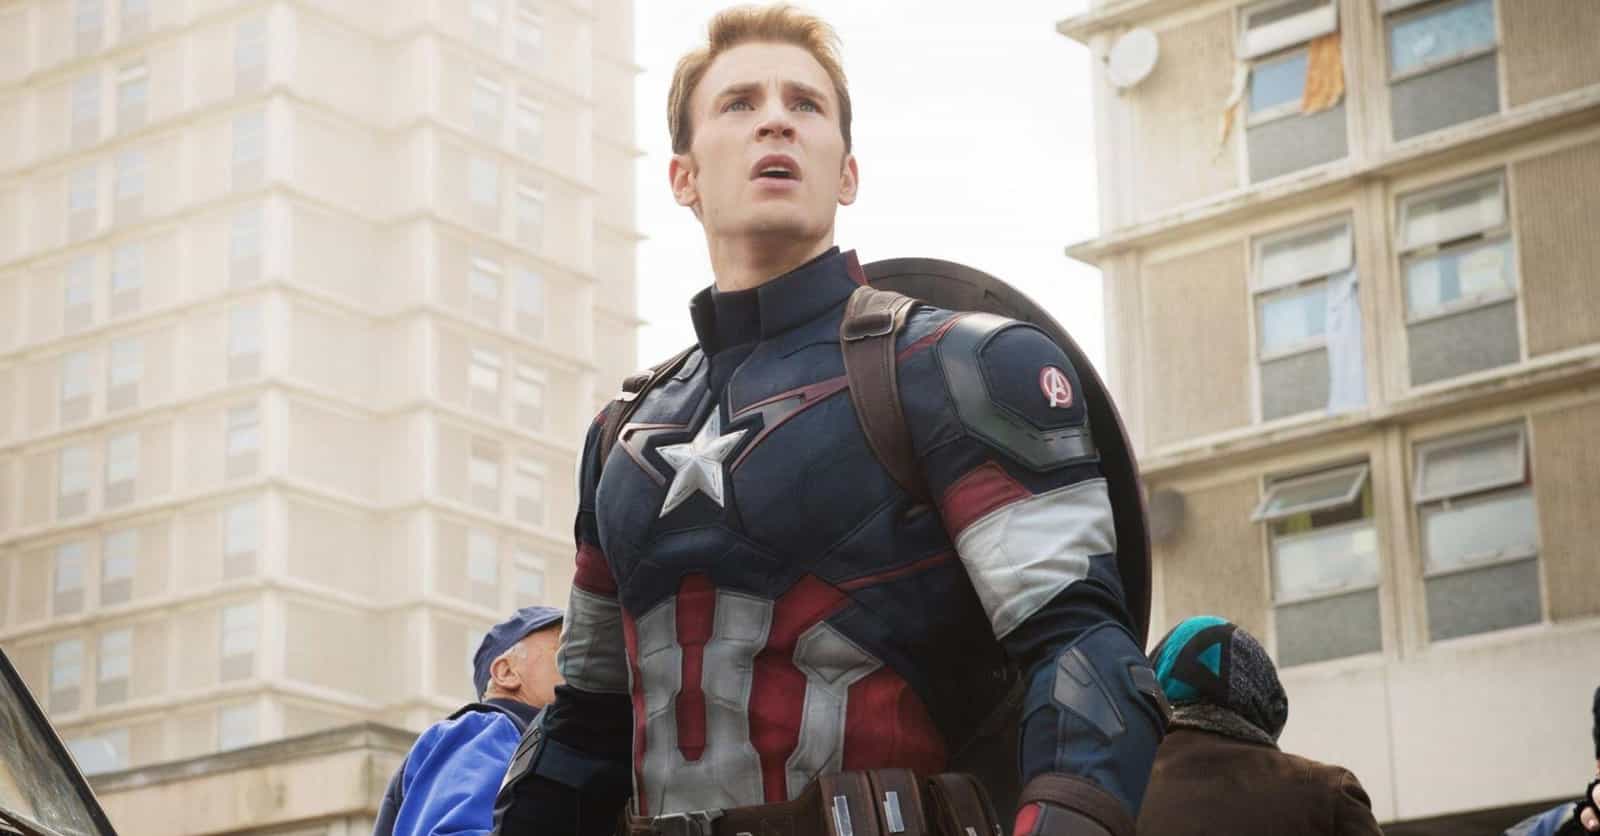 A Complete Timeline Of Steve Rogers And The Legacy Of The Captain America Shield